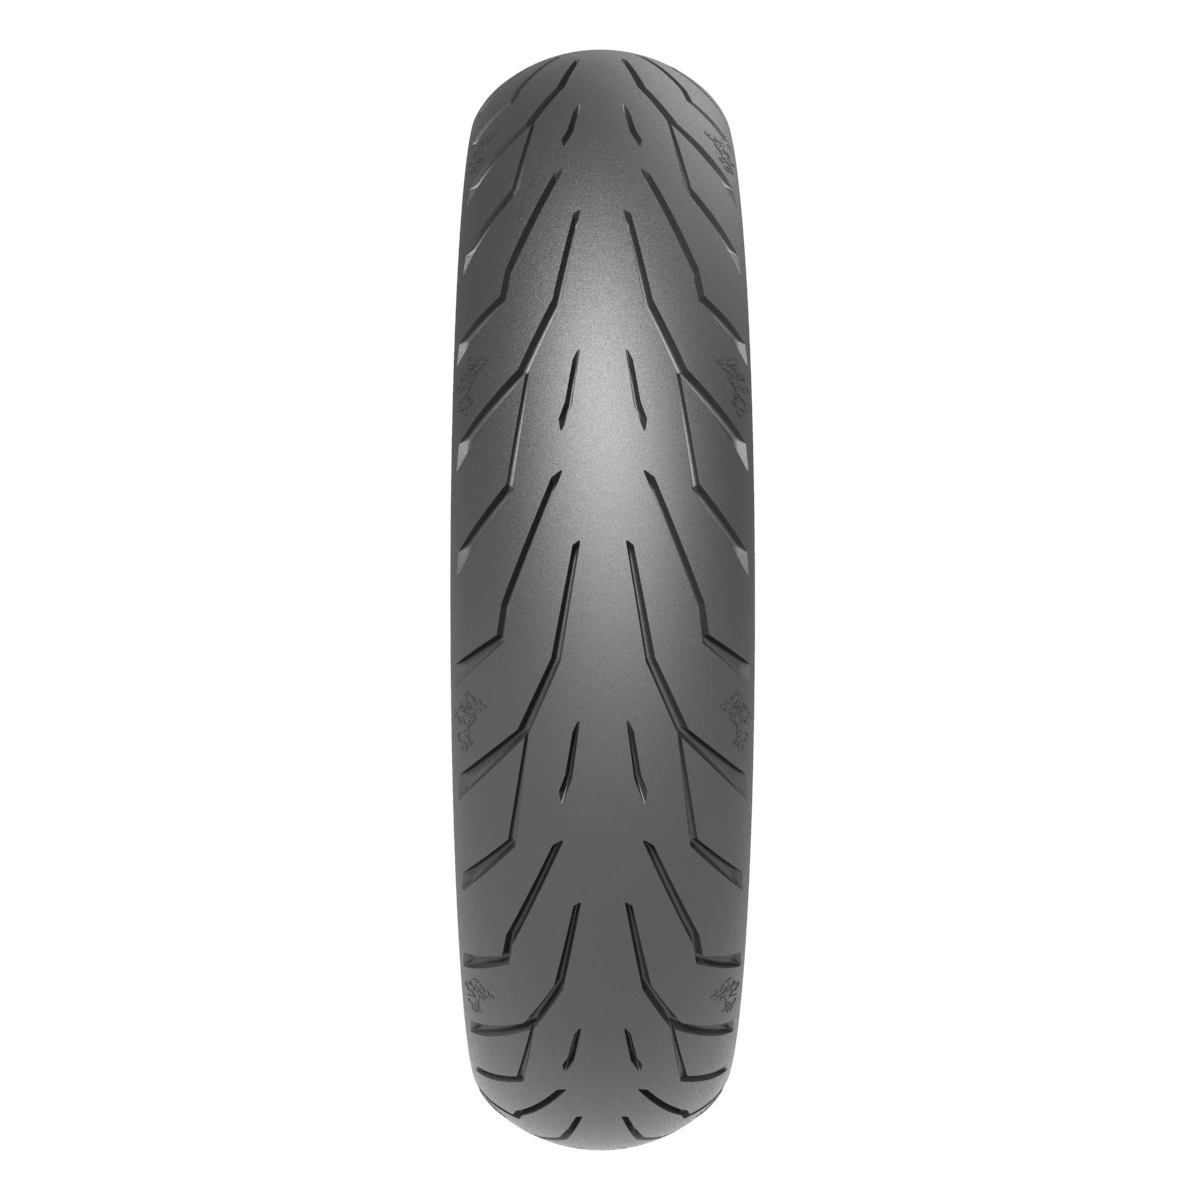 TIMSUN TS-690F, 12 Inch, 13 Inch, 14 Inch, 15 Inch, Scooter Motorcycle Tyre with High Mileage and High Grip, IATF16949/JIS/E-MARK/DOT/BIS/SNI/CCC Certificated